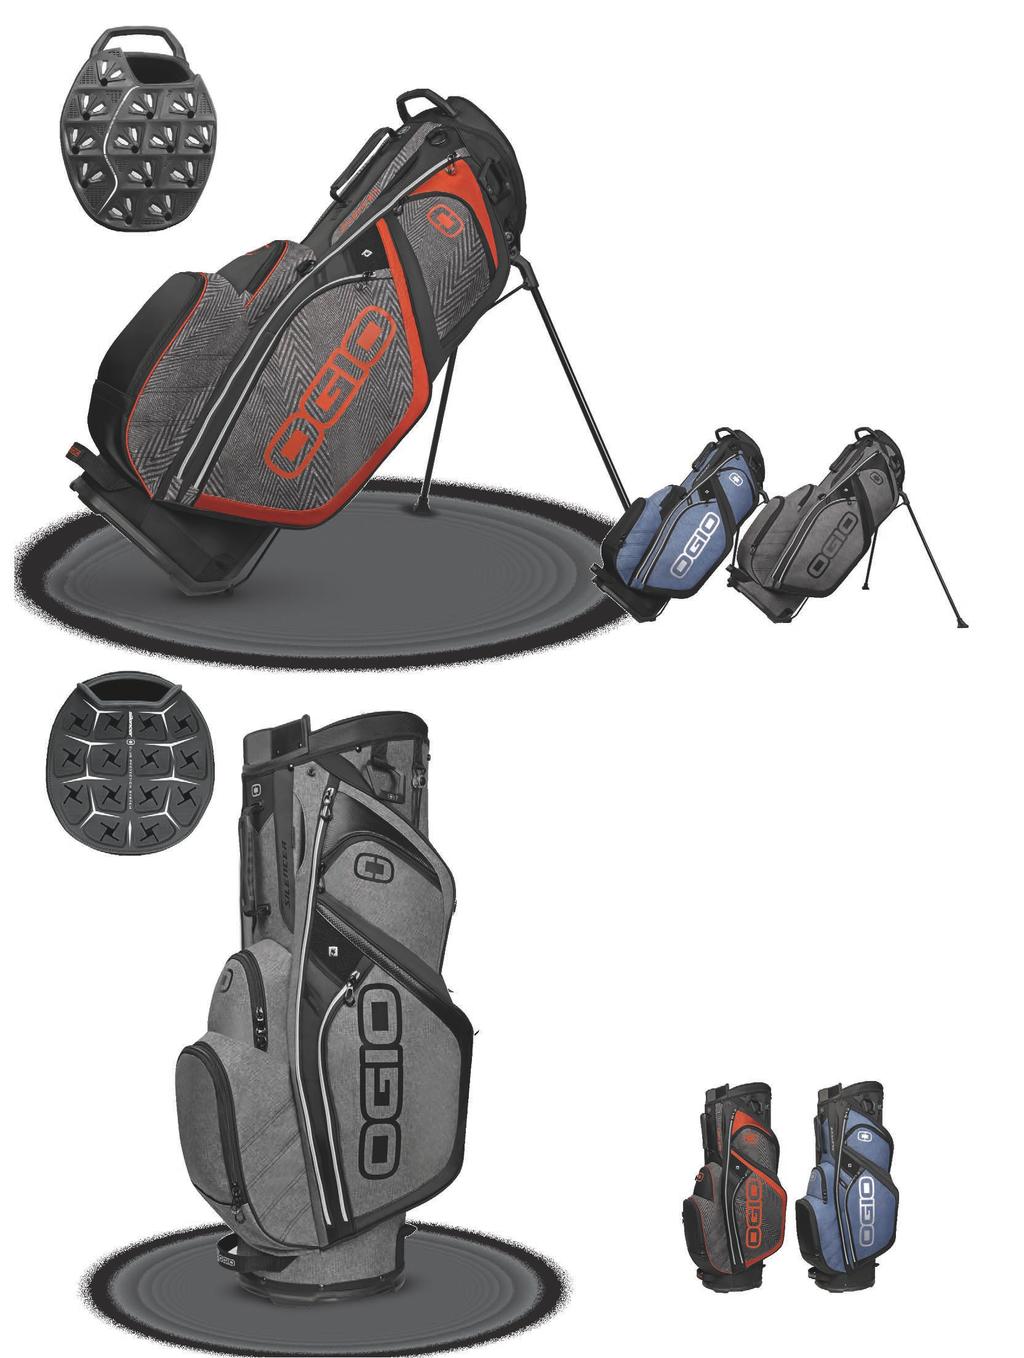 DOUBLE STRAP [STAND] SILENCER ST YLE:125050 single strap compatible Click, grip, lock and hold. Secure and protect your clubs with the innovative Silencer Club Protection System stand bag. 9.